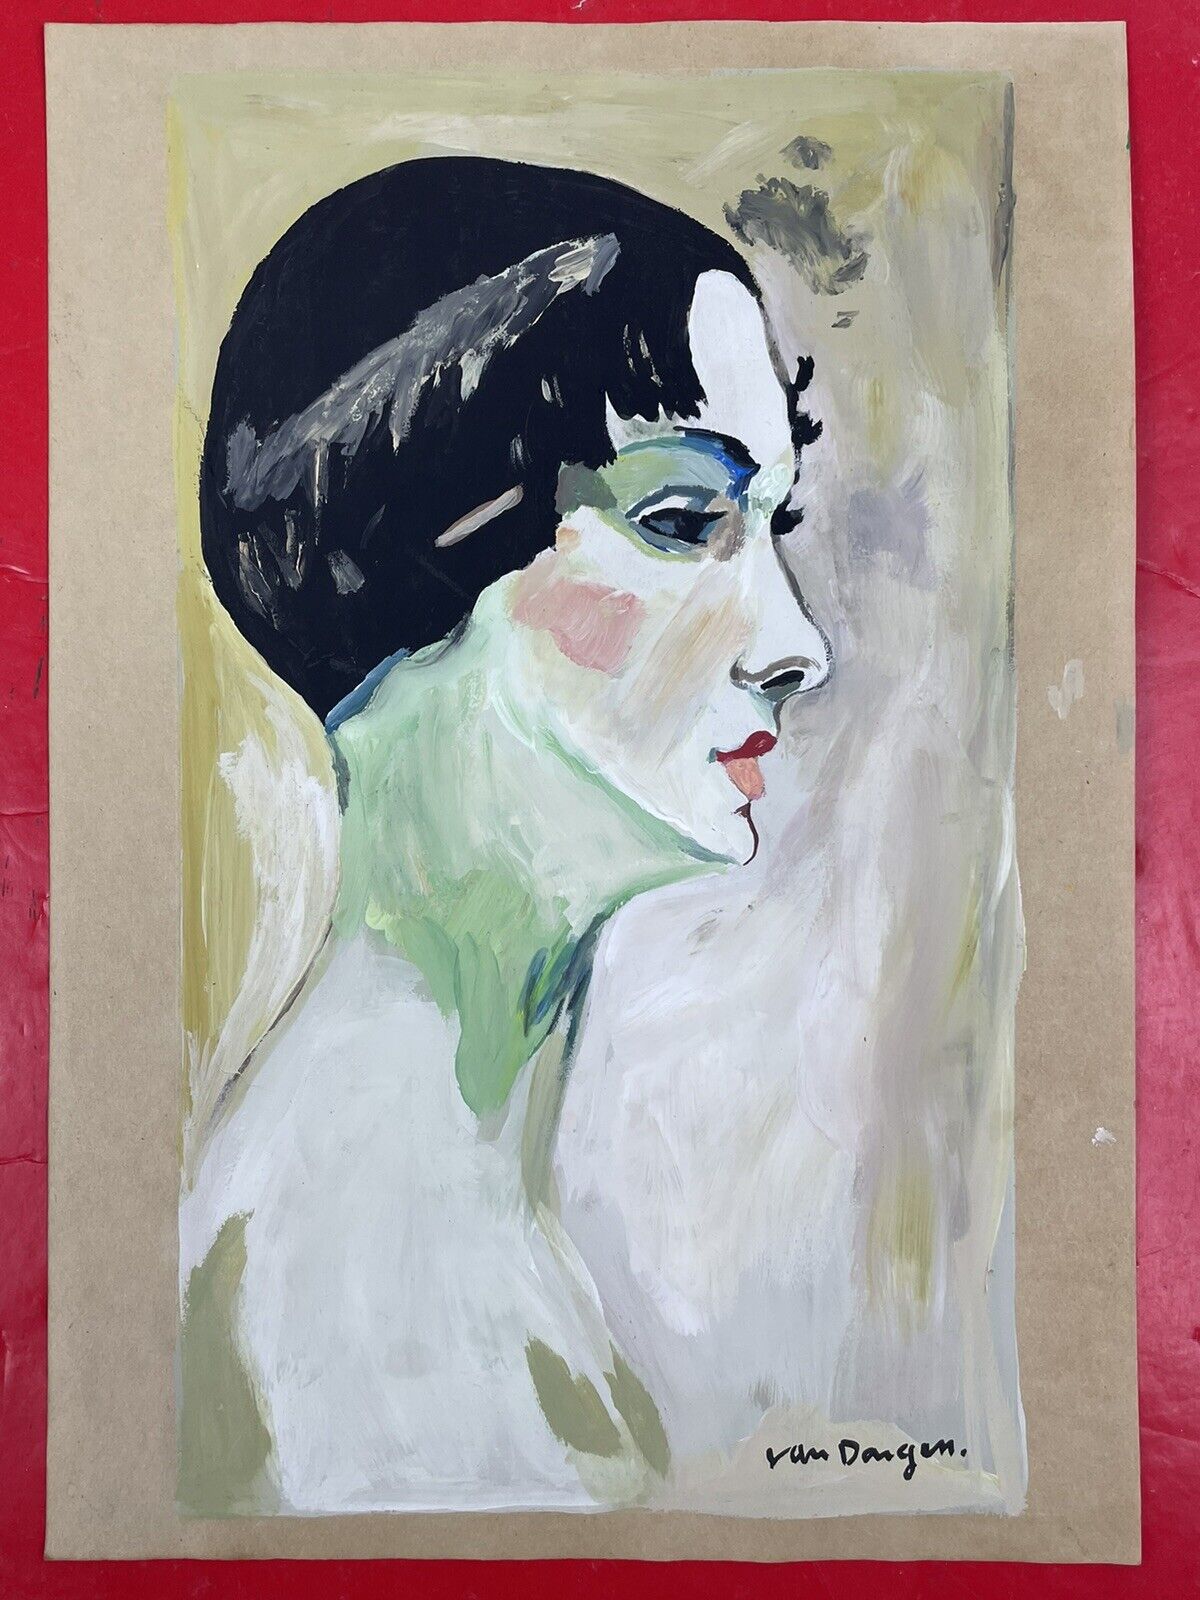 Kees van Dongen (Handmade) Drawing - Painting Mixed media on old paper signed